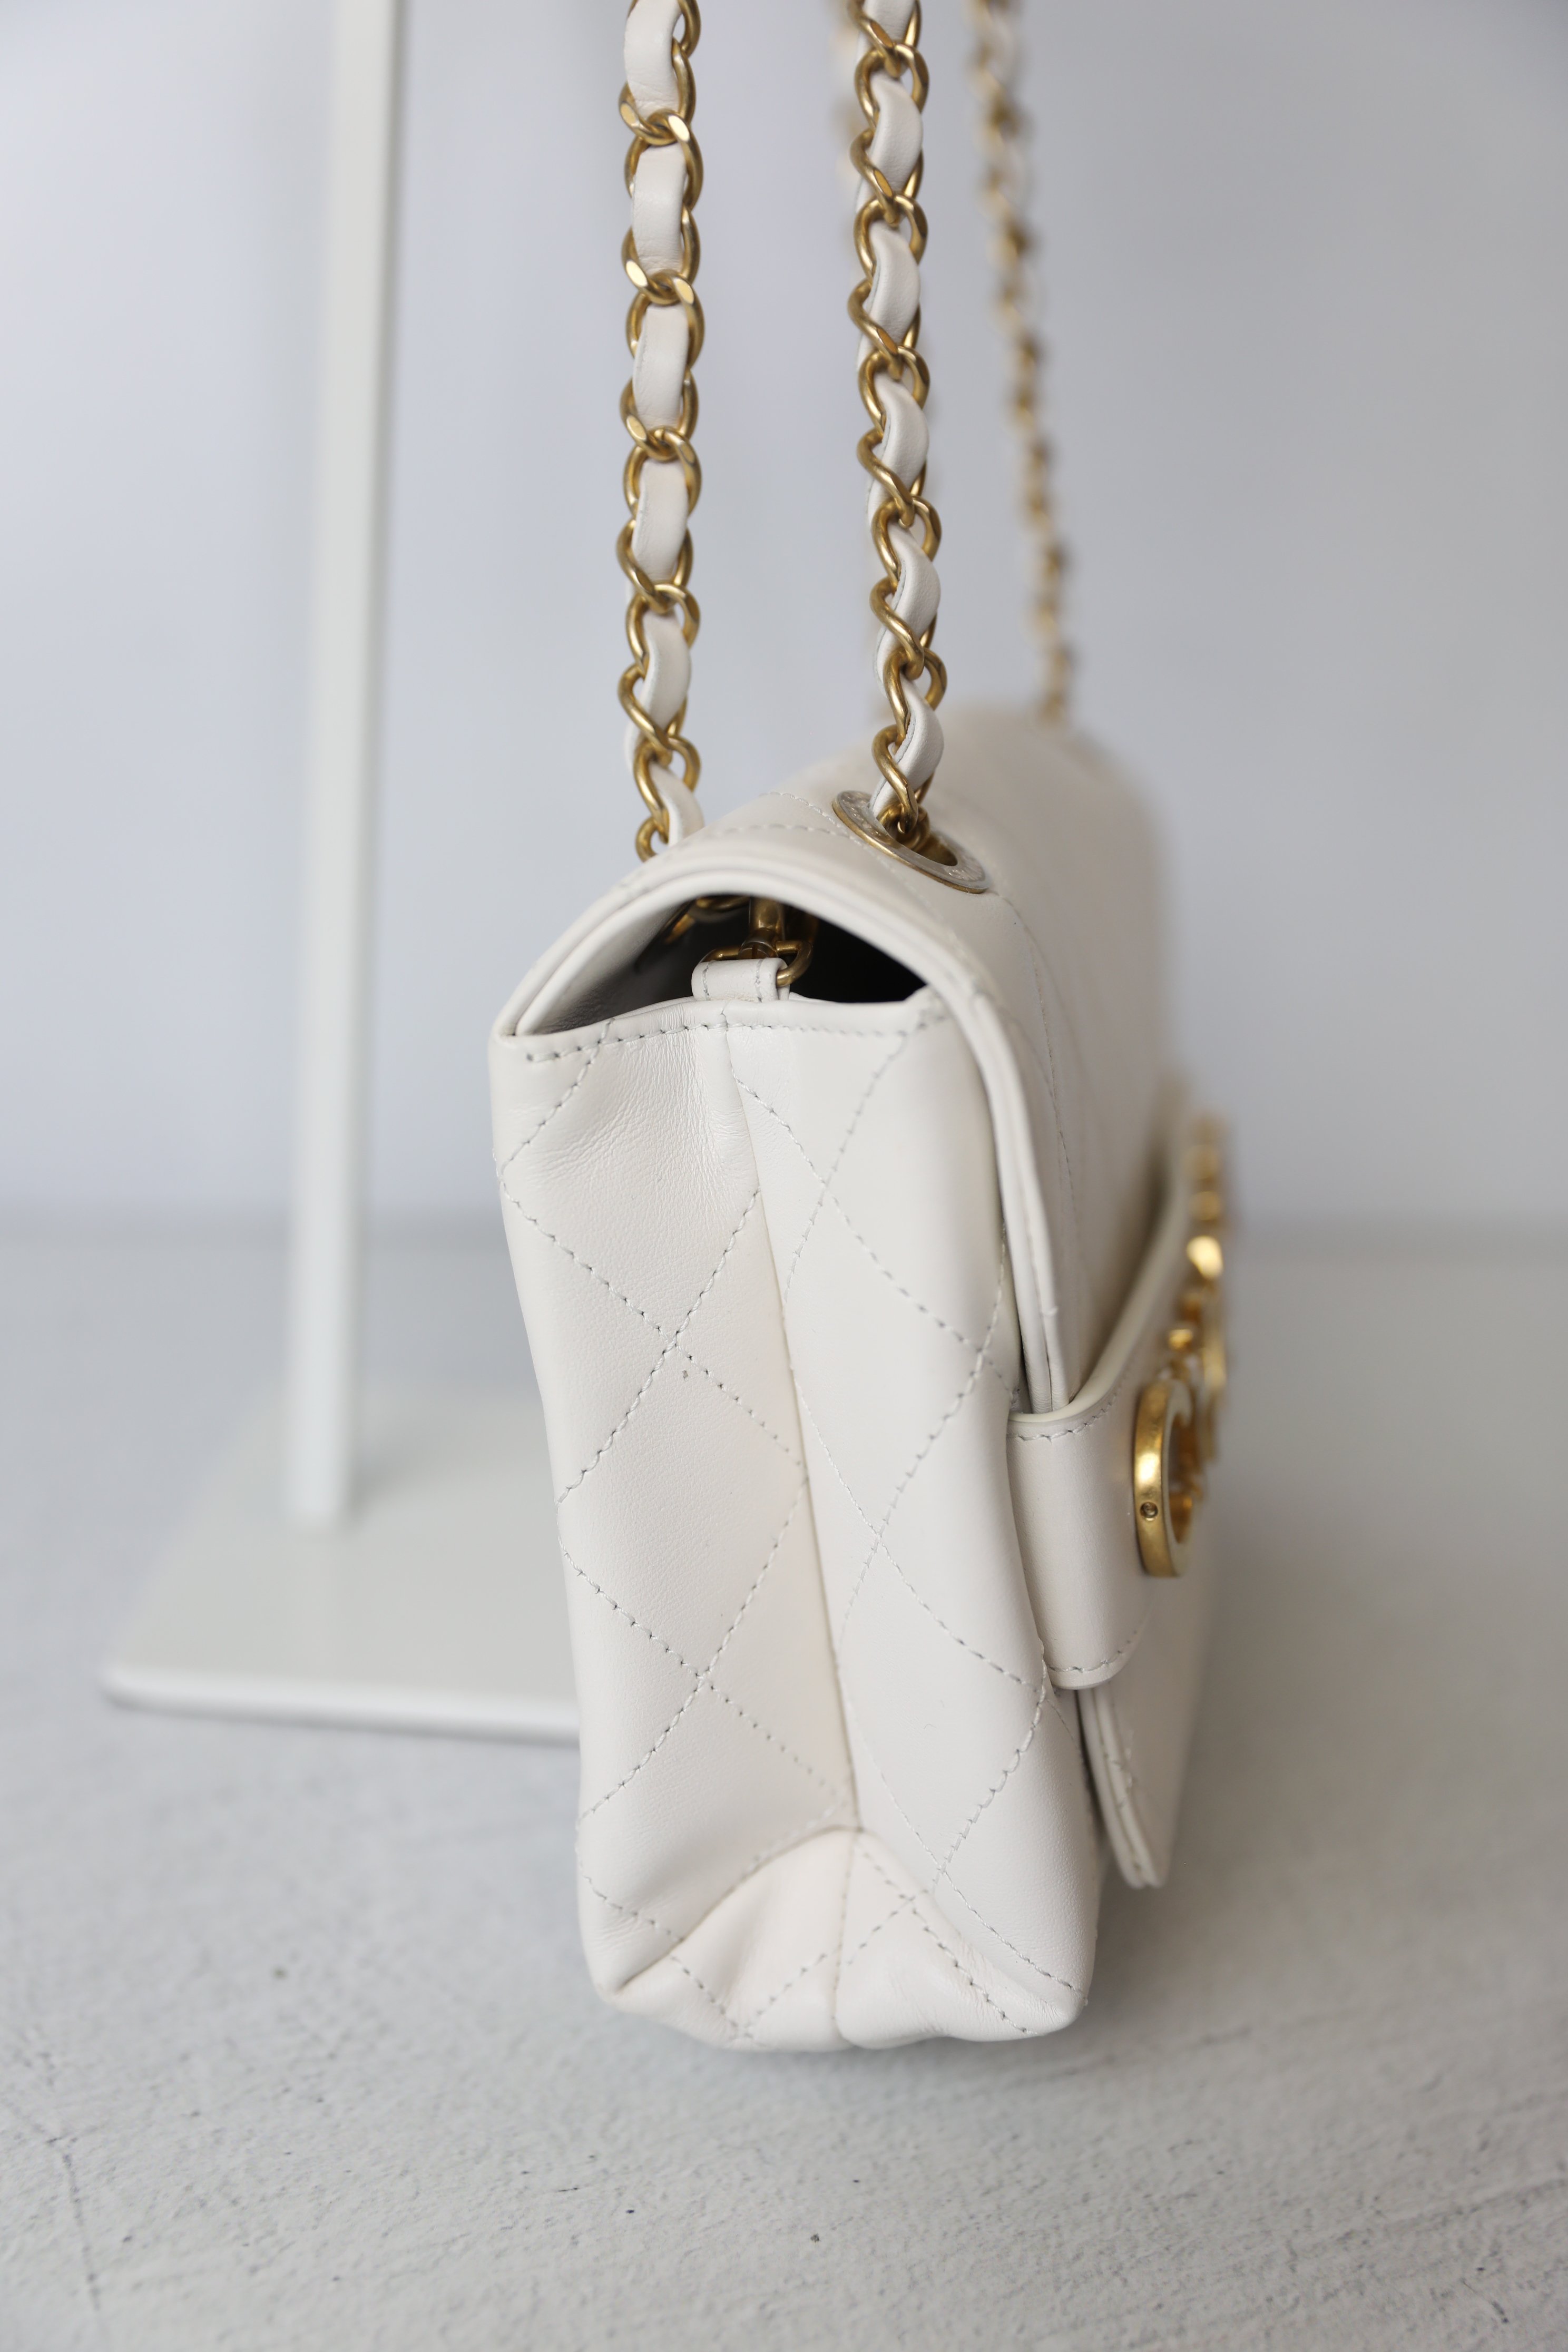 Chanel Enchained Flap Medium, White Leather with Brushed Gold Hardware,  Preowned in Dustbag CMA001 - Julia Rose Boston